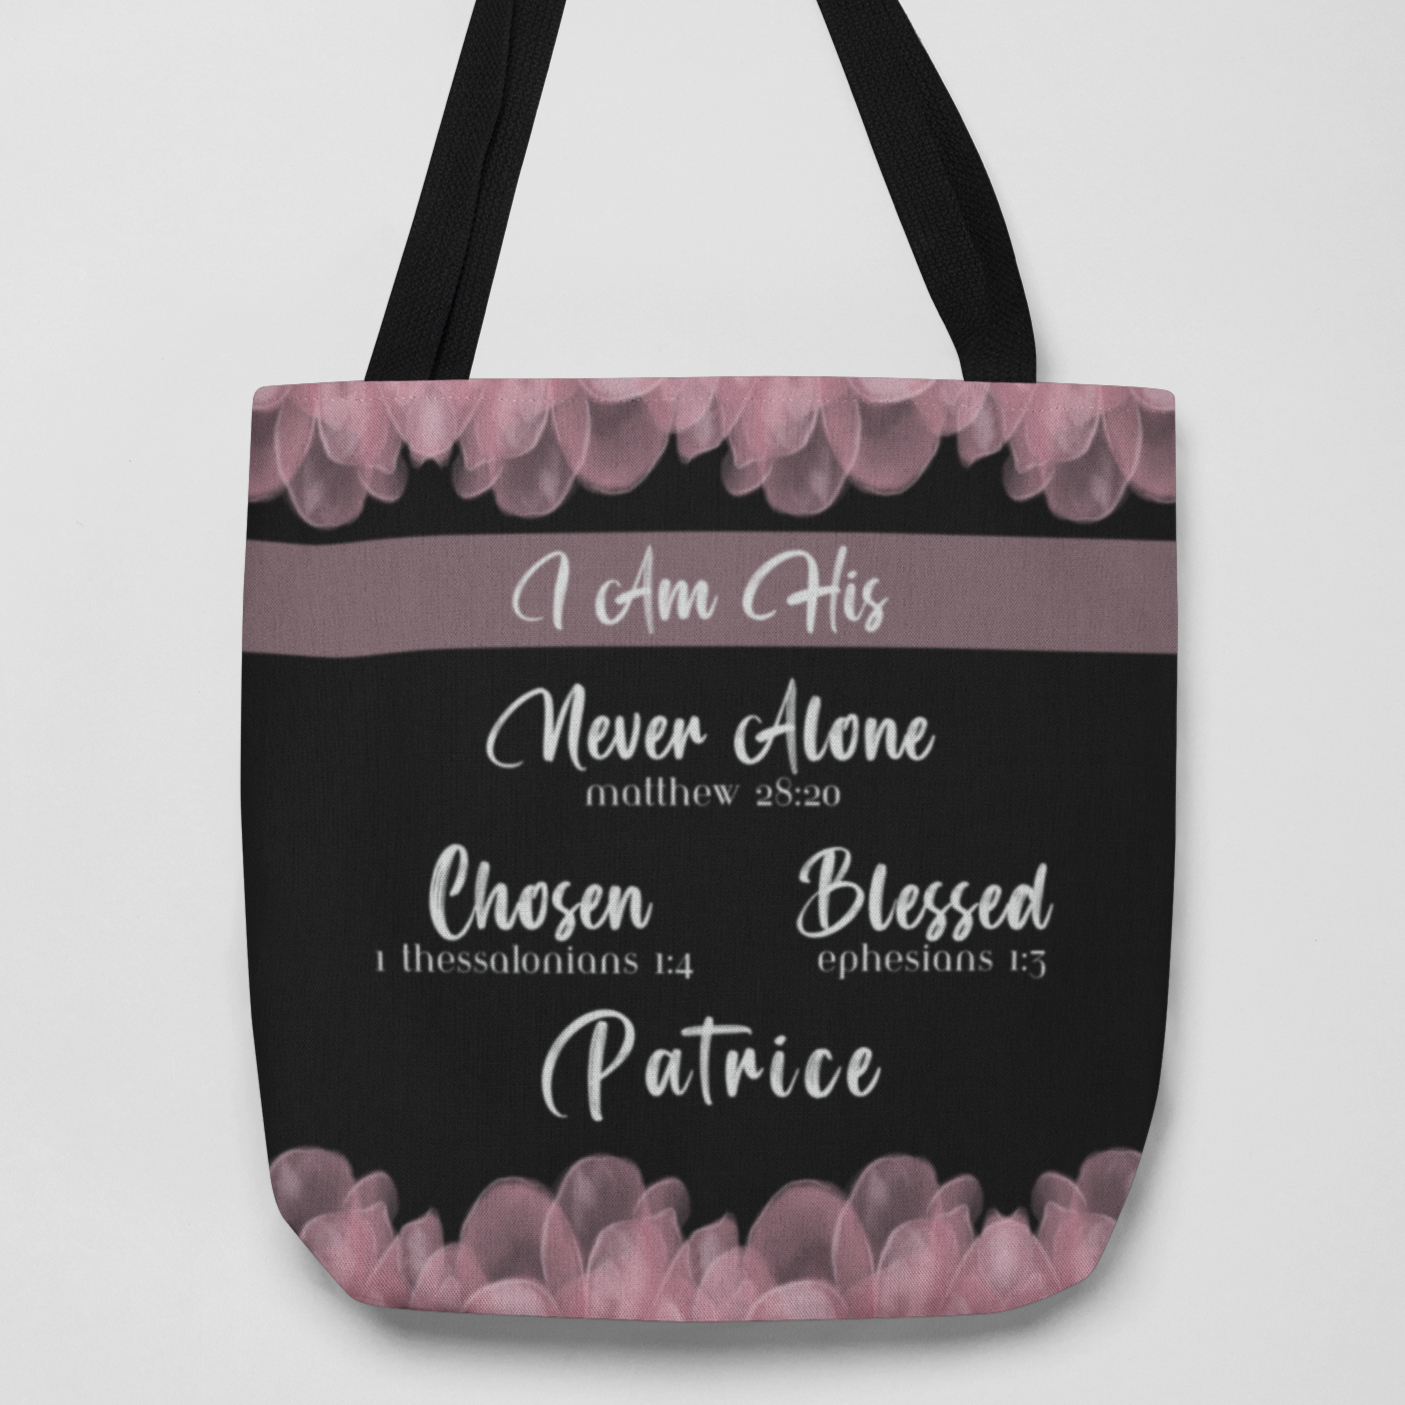 Personalized Bible Verse Tote Bag Pink Flowers Book or Bible Bag